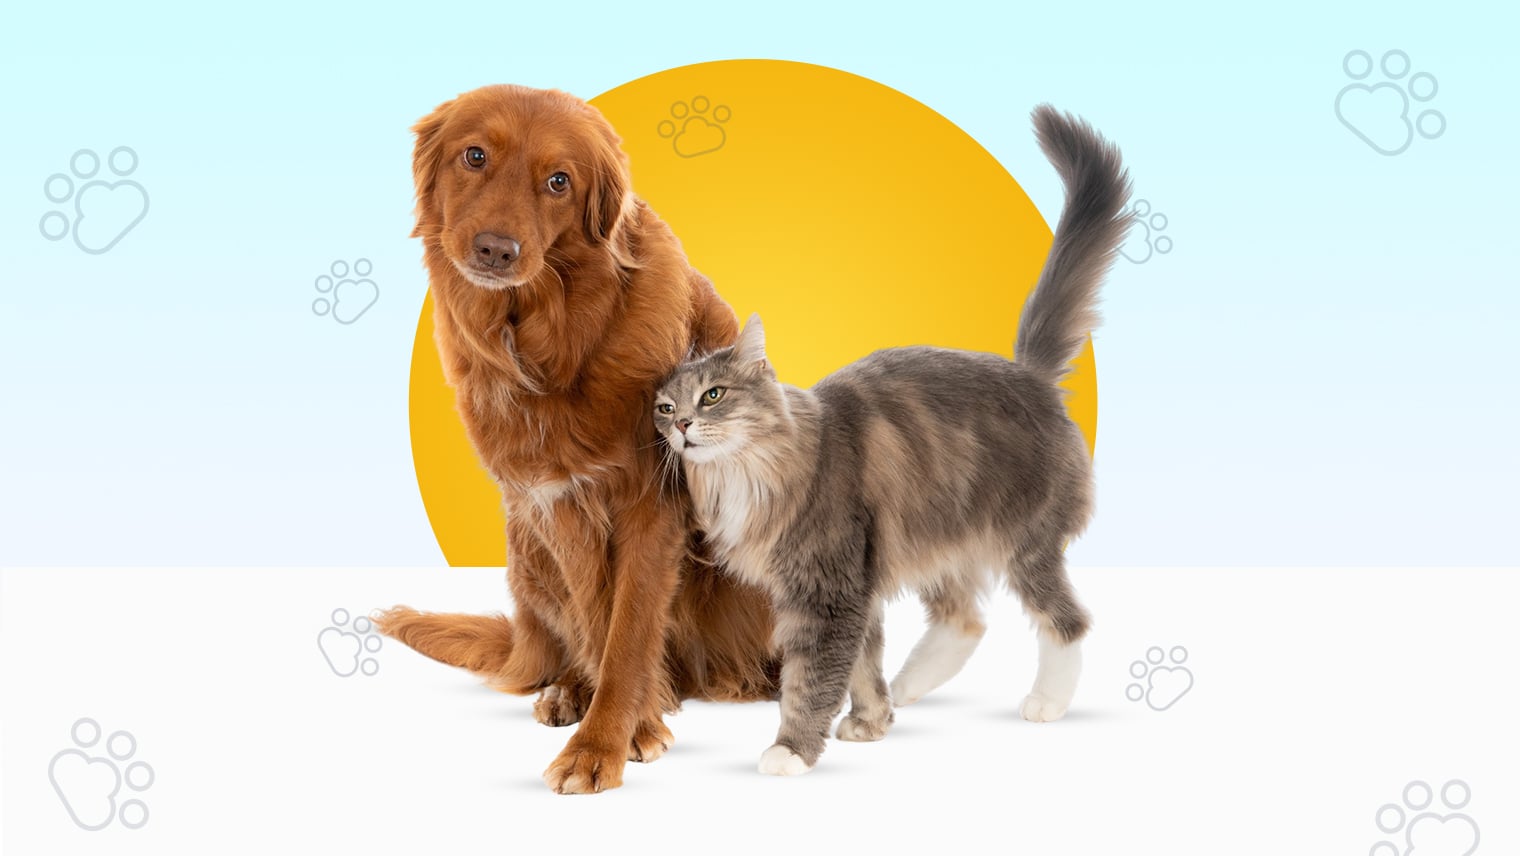 What is Insight Pet Solutions about?